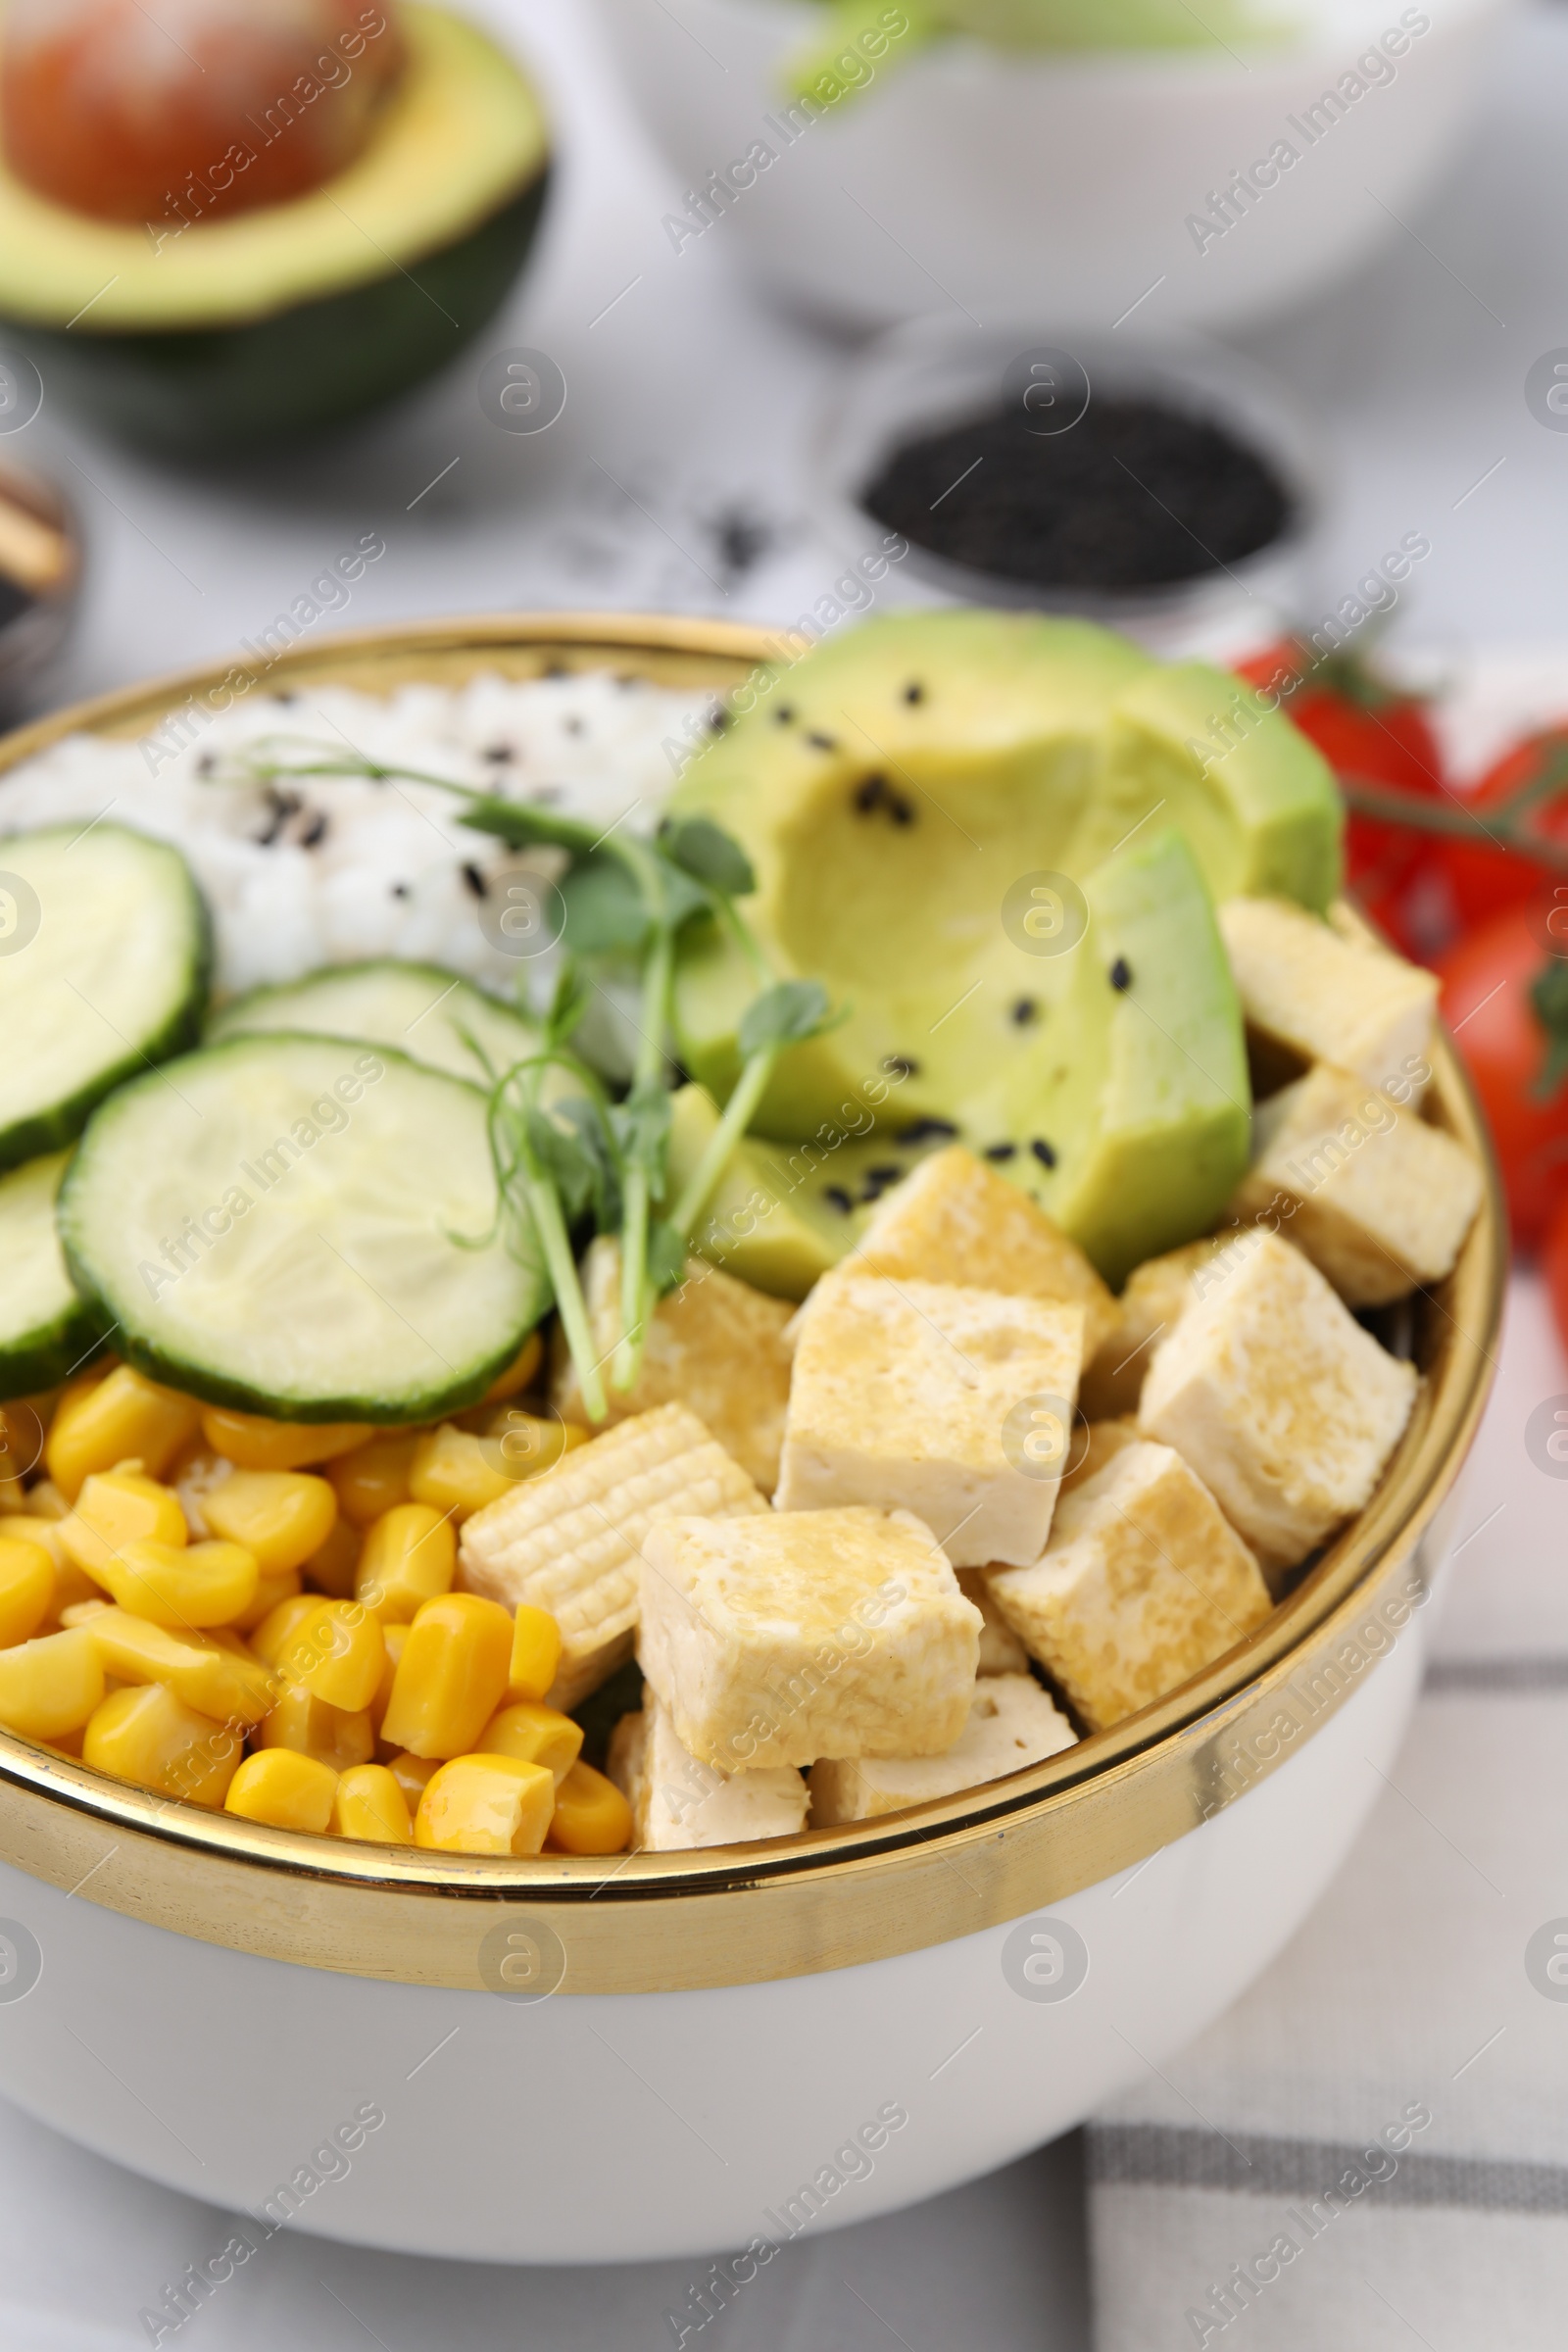 Photo of Delicious poke bowl with vegetables, tofu, avocado and microgreens served on white table, closeup